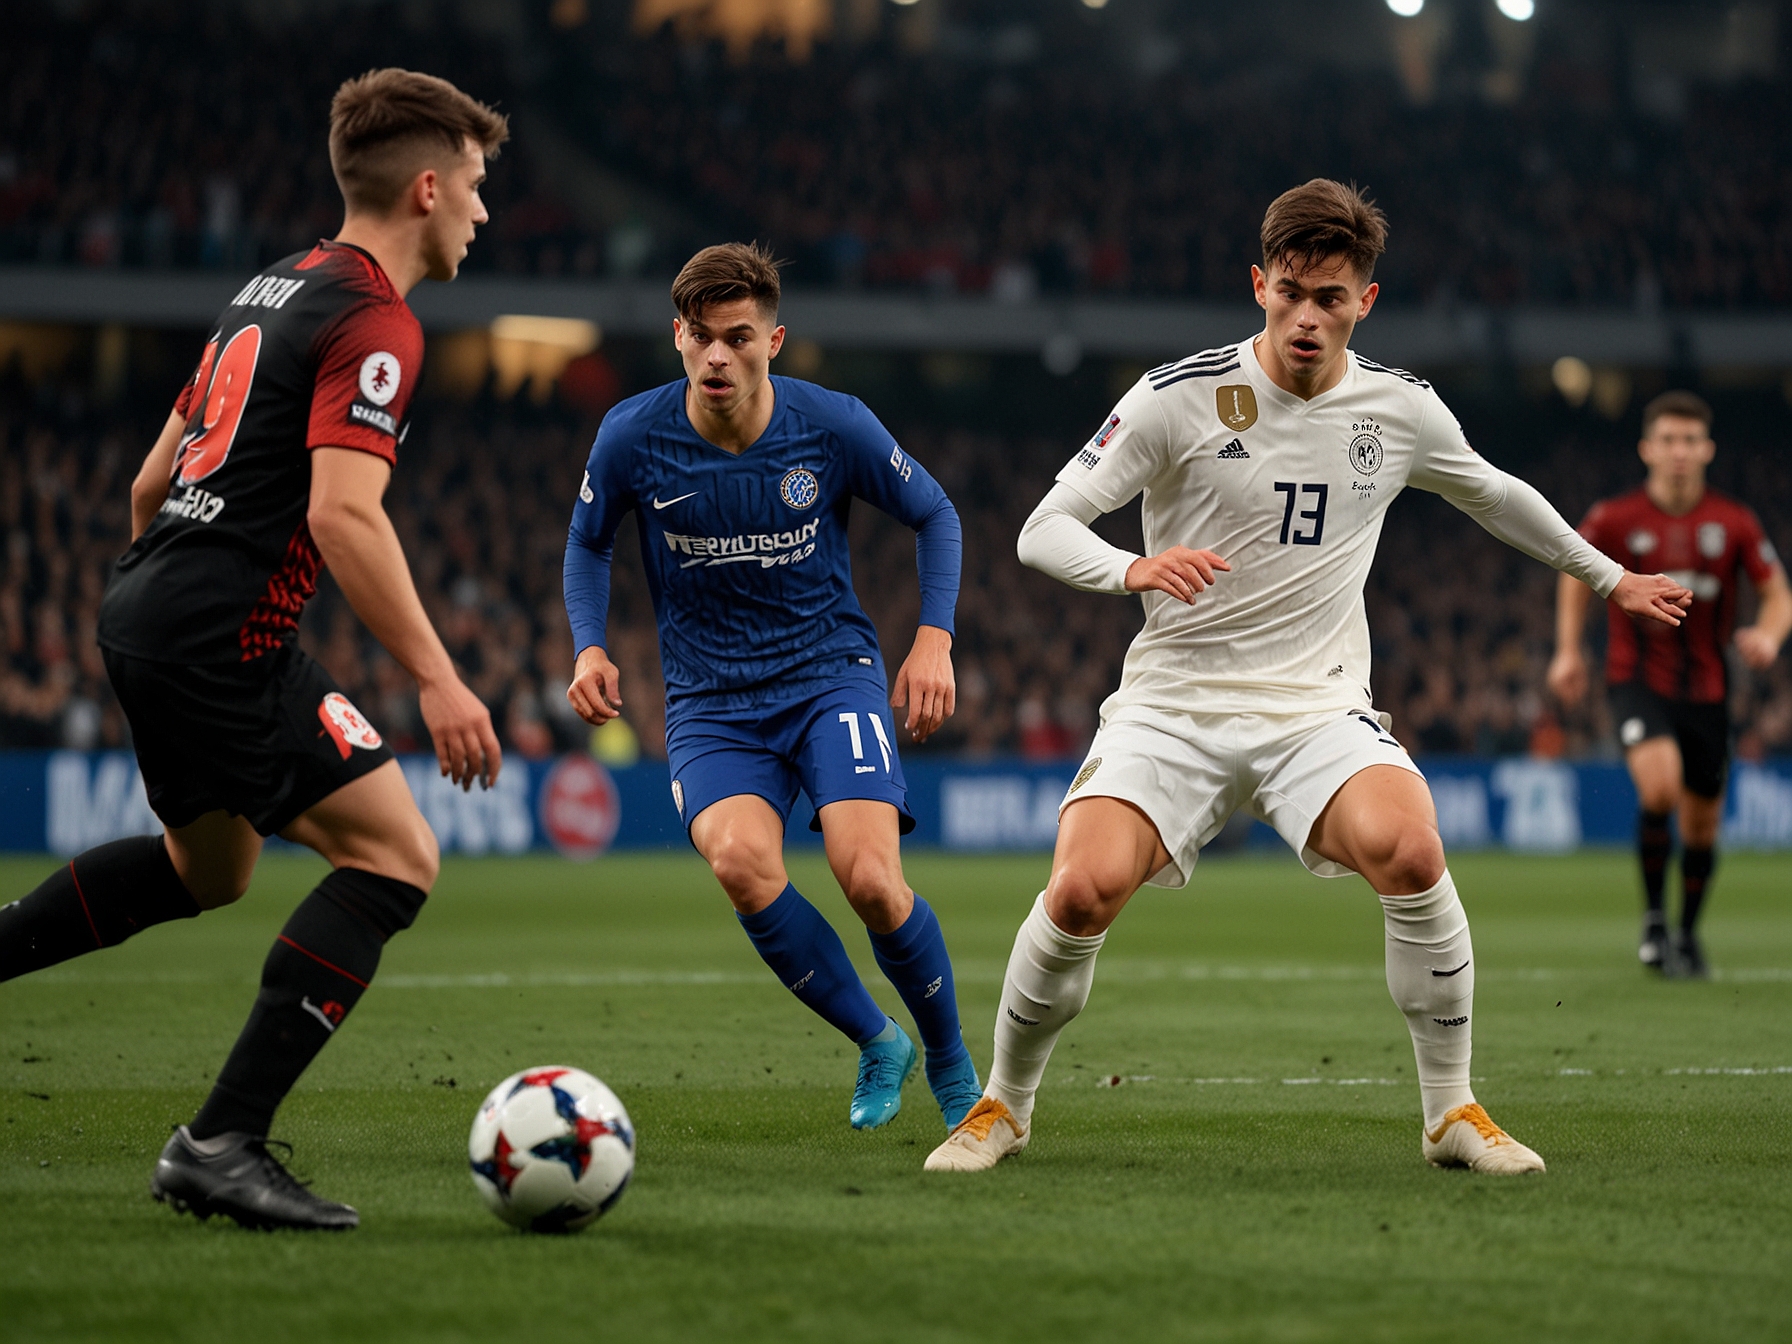 Jonas Hofmann in action, dribbling past defenders during a match, representing the fans' hopeful candidate for replacing Kai Havertz in the crucial knockout stages.